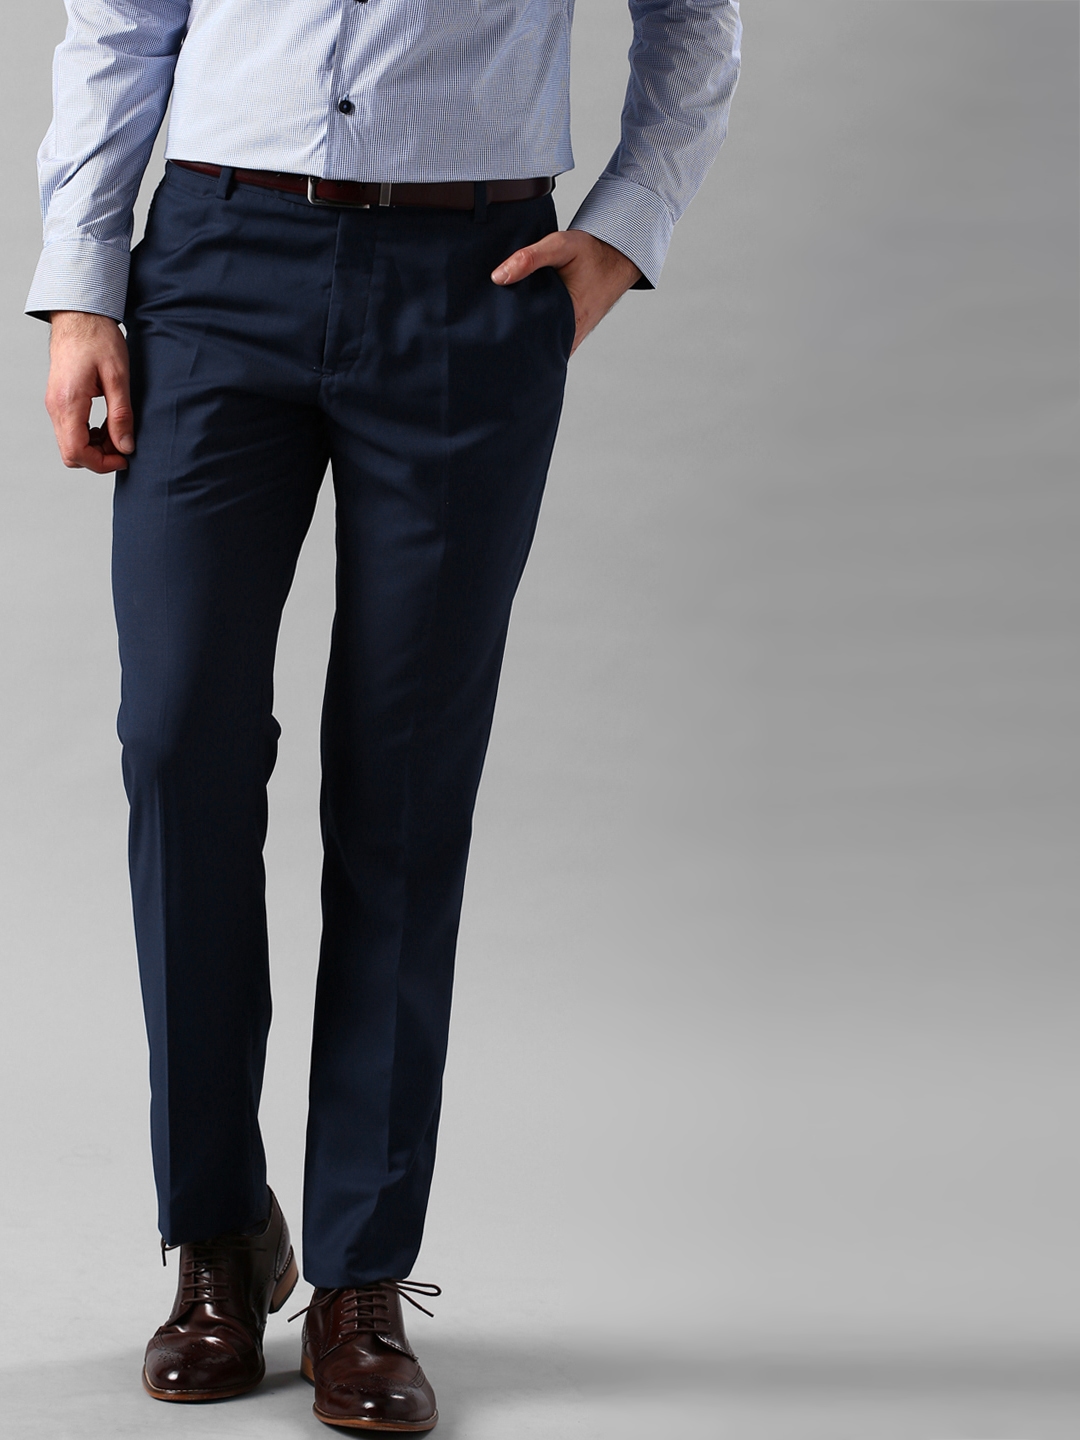 What Colors Go With Navy Blue Pants (2023 Updated)-mncb.edu.vn